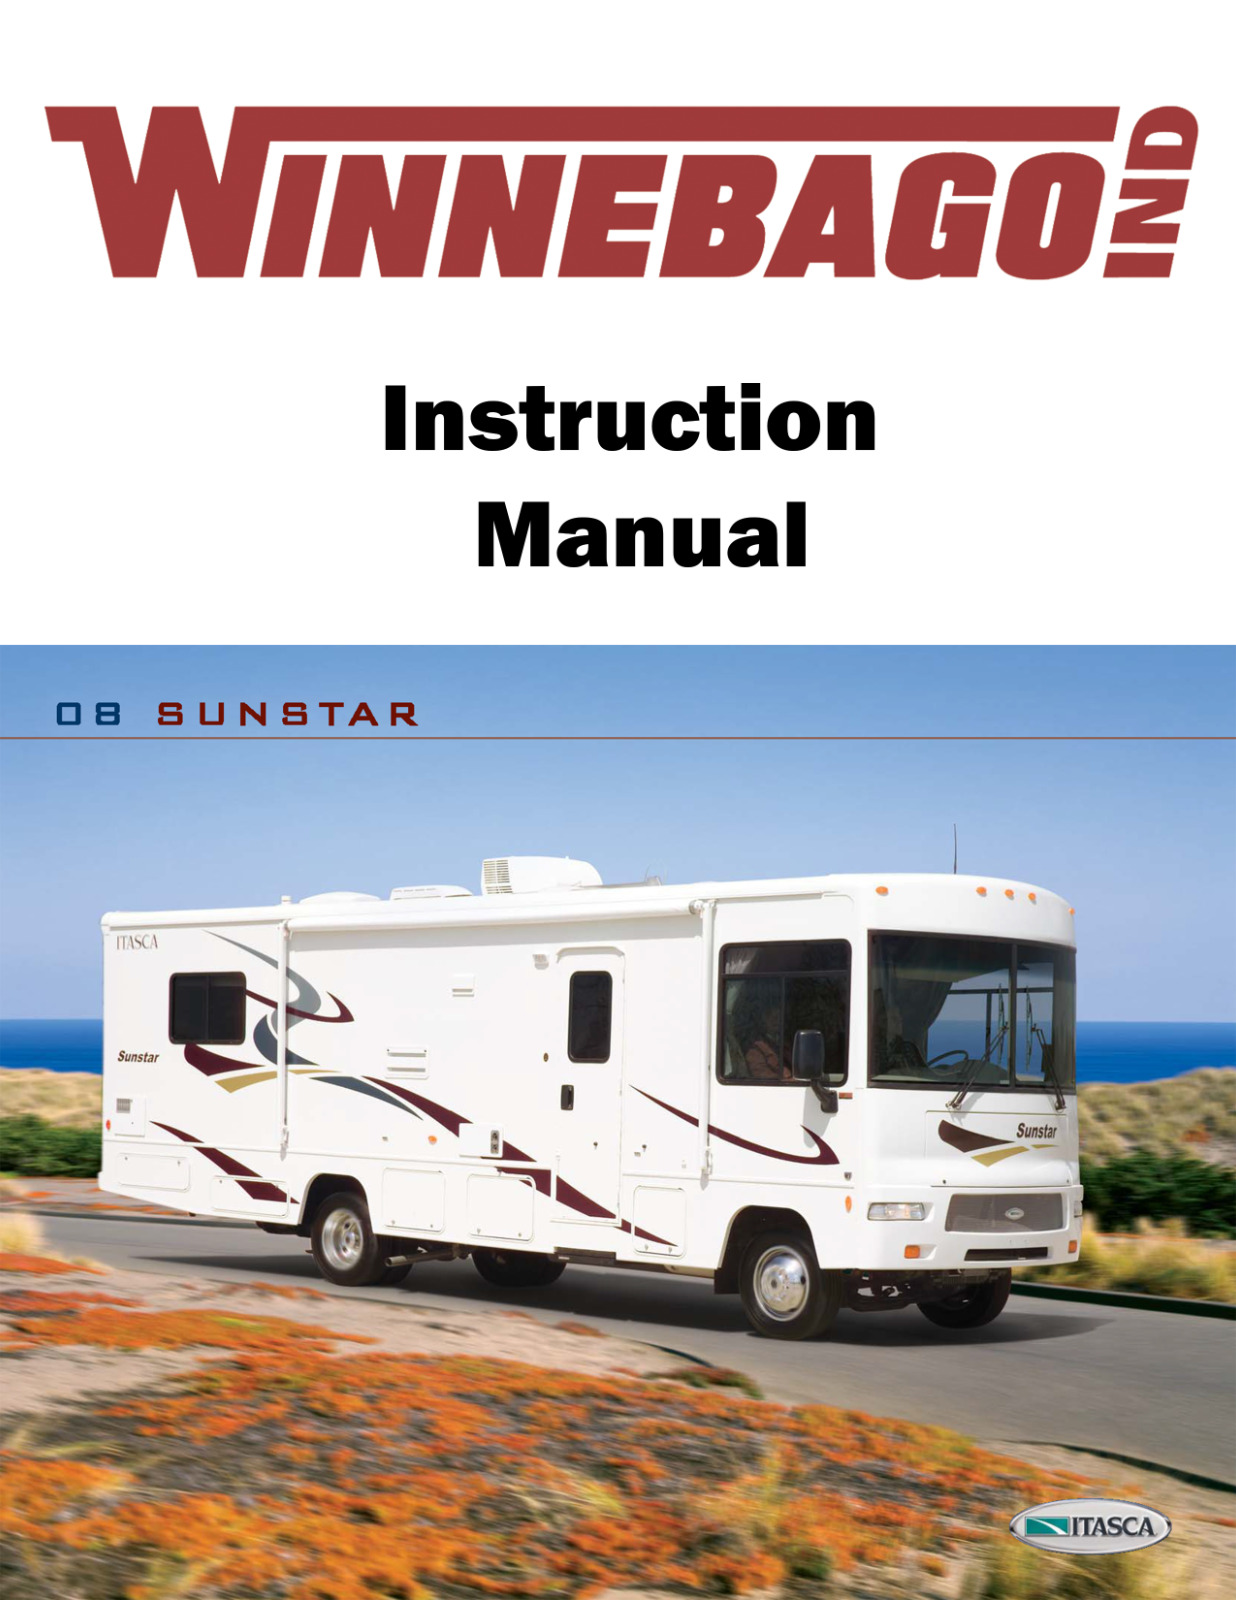 2008 Winnebago Sunstar Home Owners Operation Manual User Guide Coil Bound